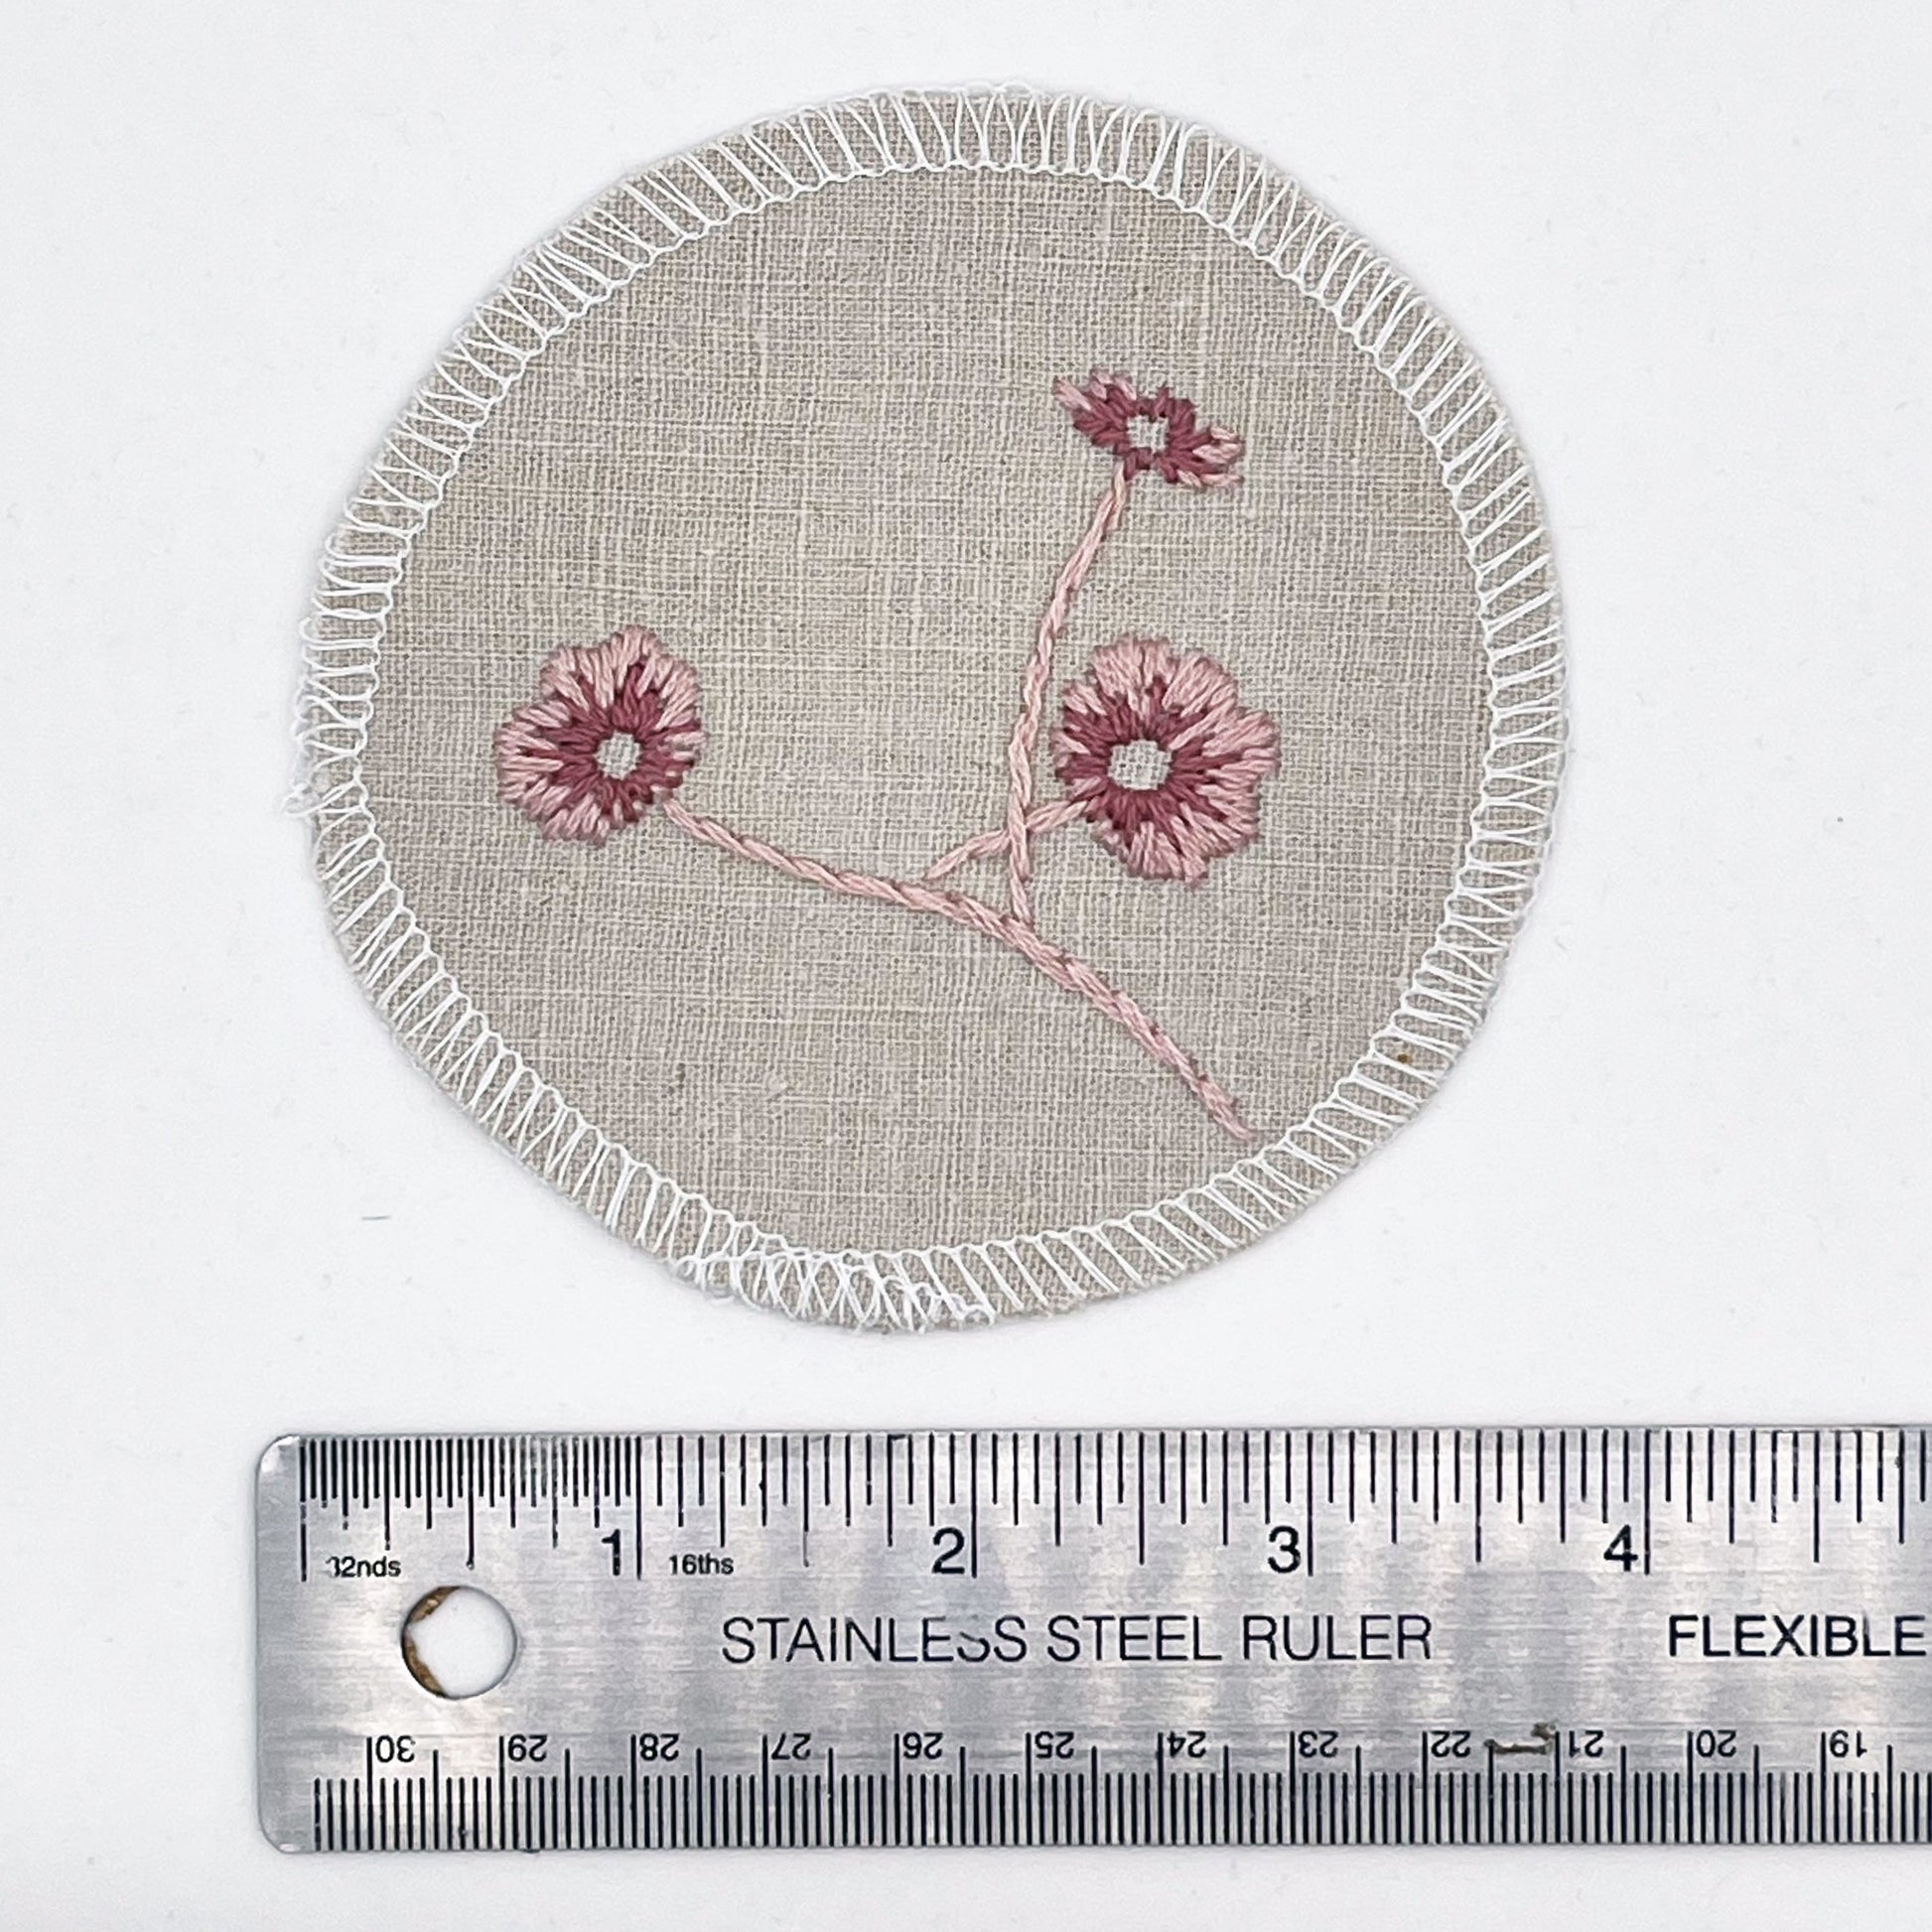 a patch made from a natural color cotton linen fabric placed next to a ruler, showing a diameter of 4 inches, hand embroidered with 3 poppies in shades of pink, edges overlocked with white thread, on a white background